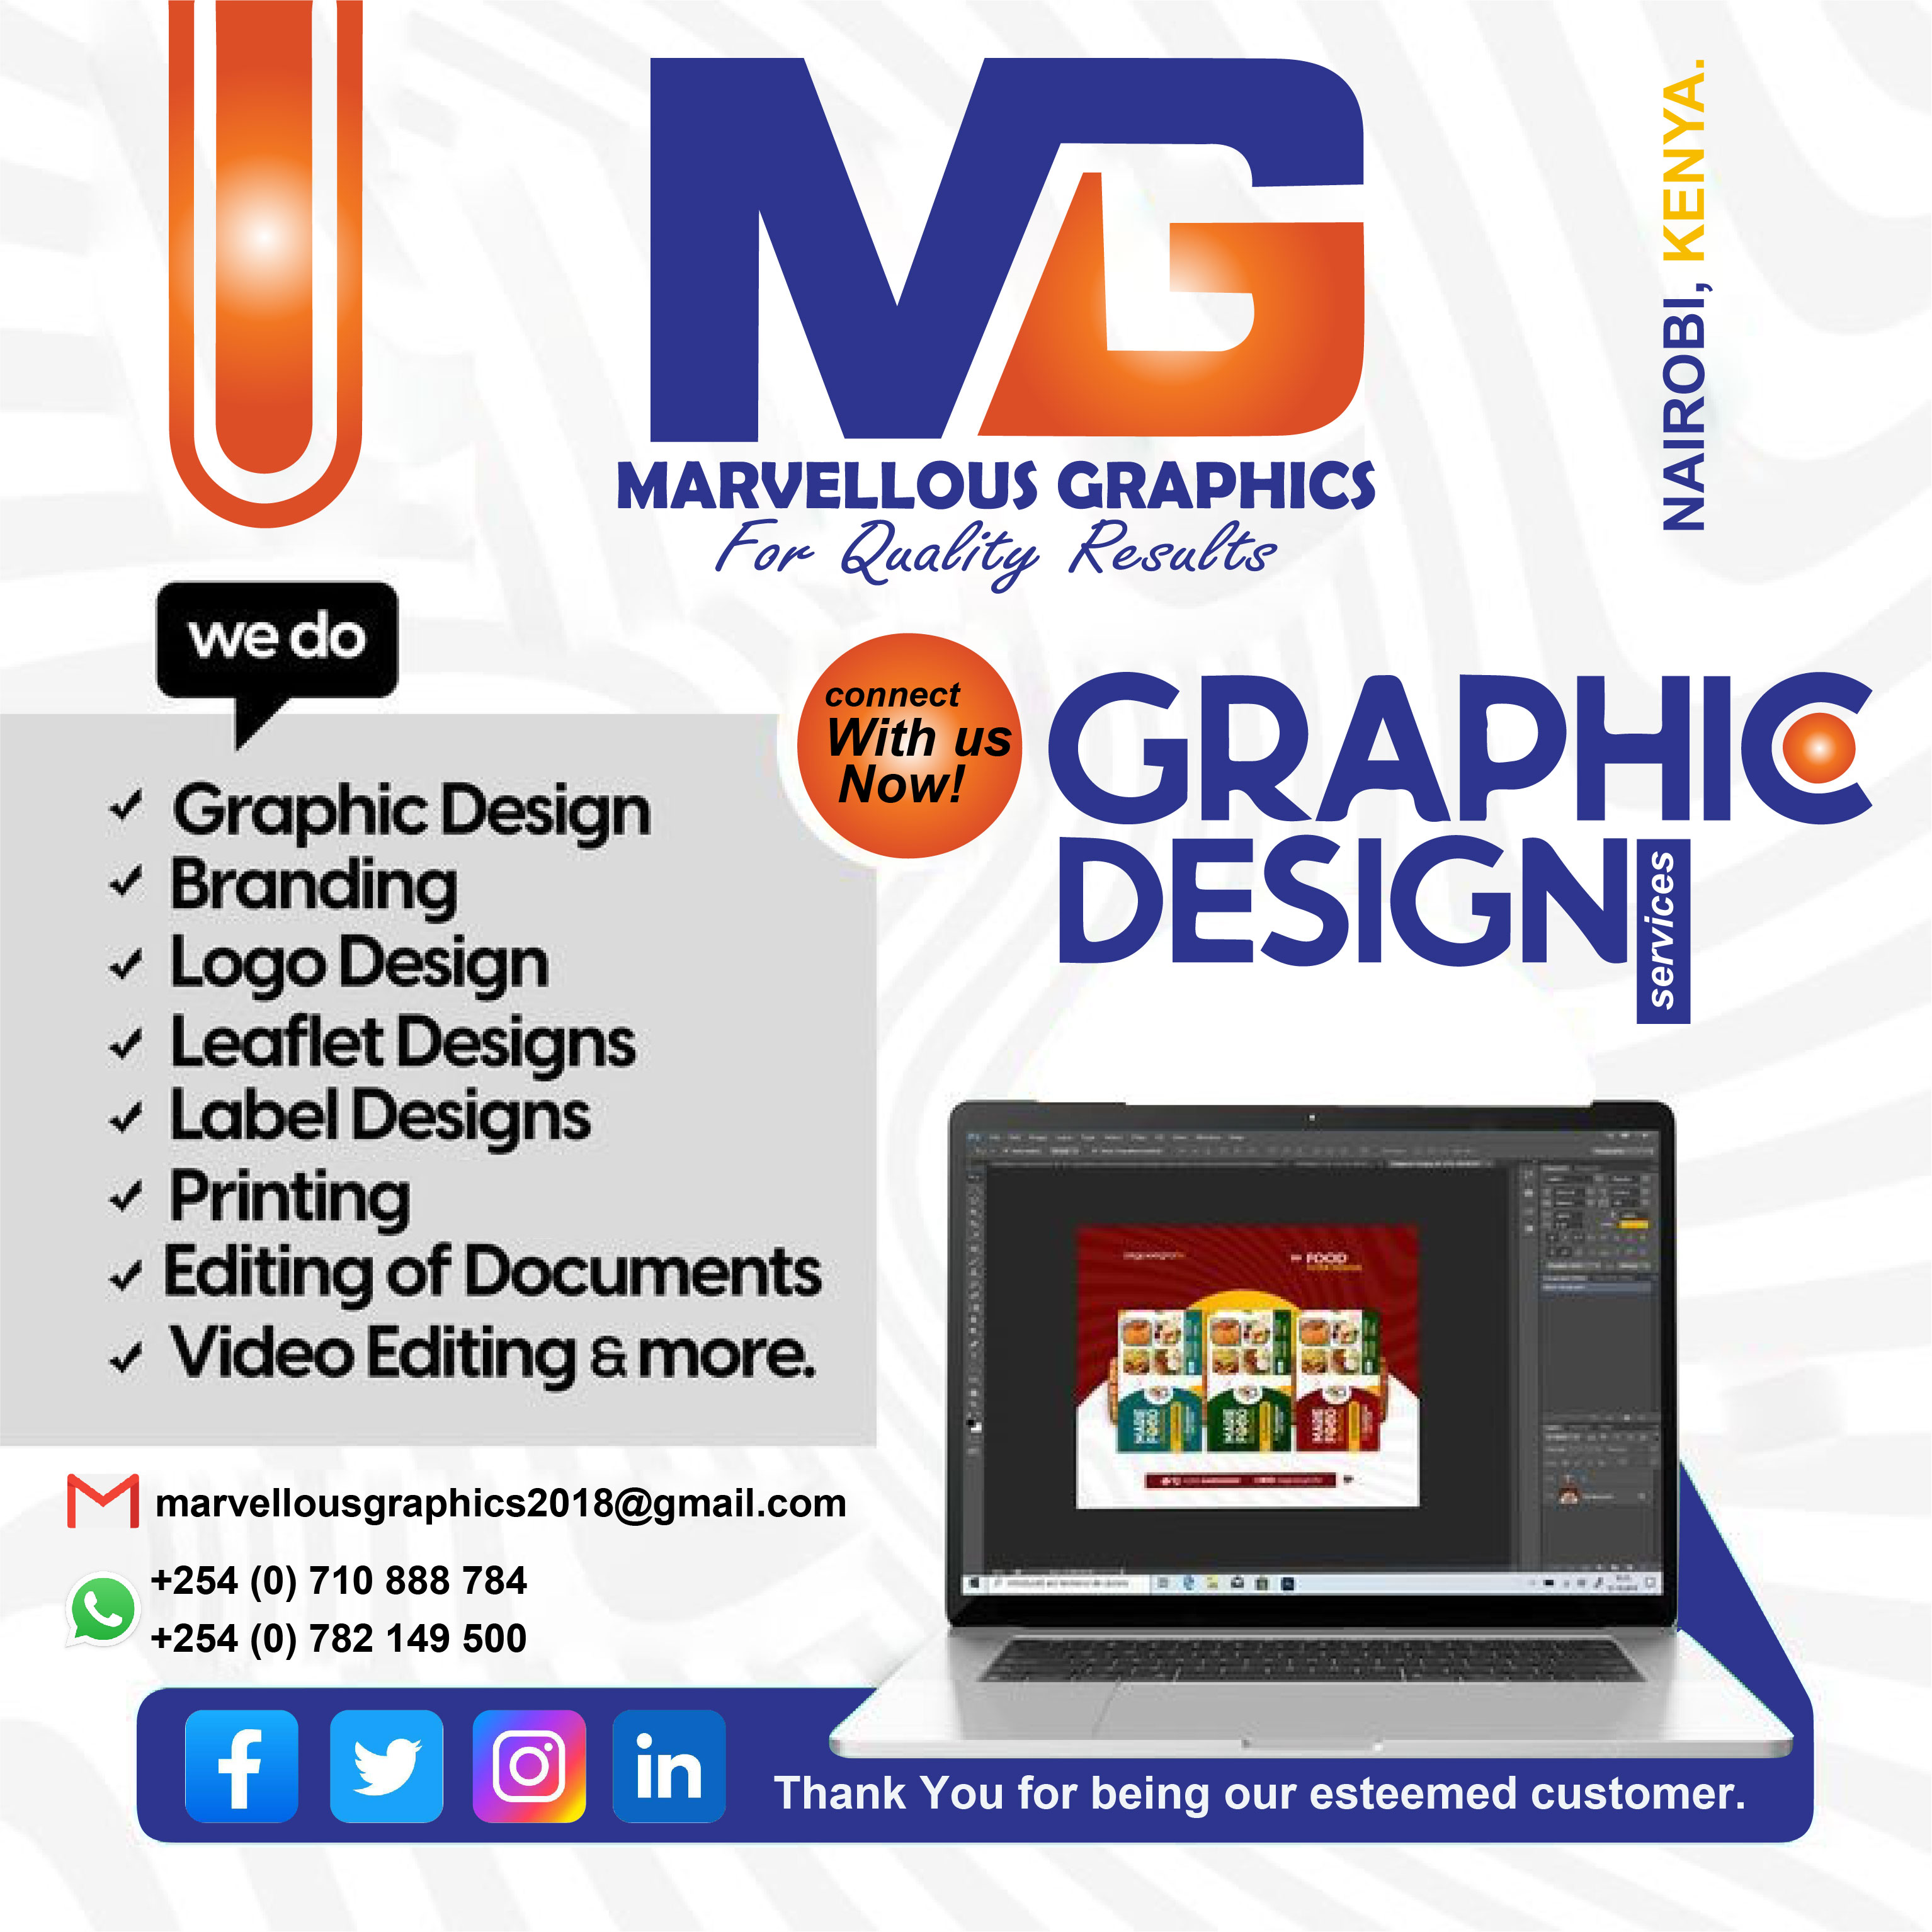 y MARVELLOUS GRAPHICS
for &amp;luat: ty Kesulls

= &amp; GRAPHIC
© Branding DESIGN]

+ Logo Design

+ Leaflet Designs

+ Label Designs

+ Printing

v Editing of Documents
+ Video Editing a more.

NAIROBI,

 
 
    
 
   

™M marvellousgraphics2018@gmail.com

+254 (0) 710 888 784
+254 (0) 782 149 500

  

f yy IN Thank You for being our esteemed customer.